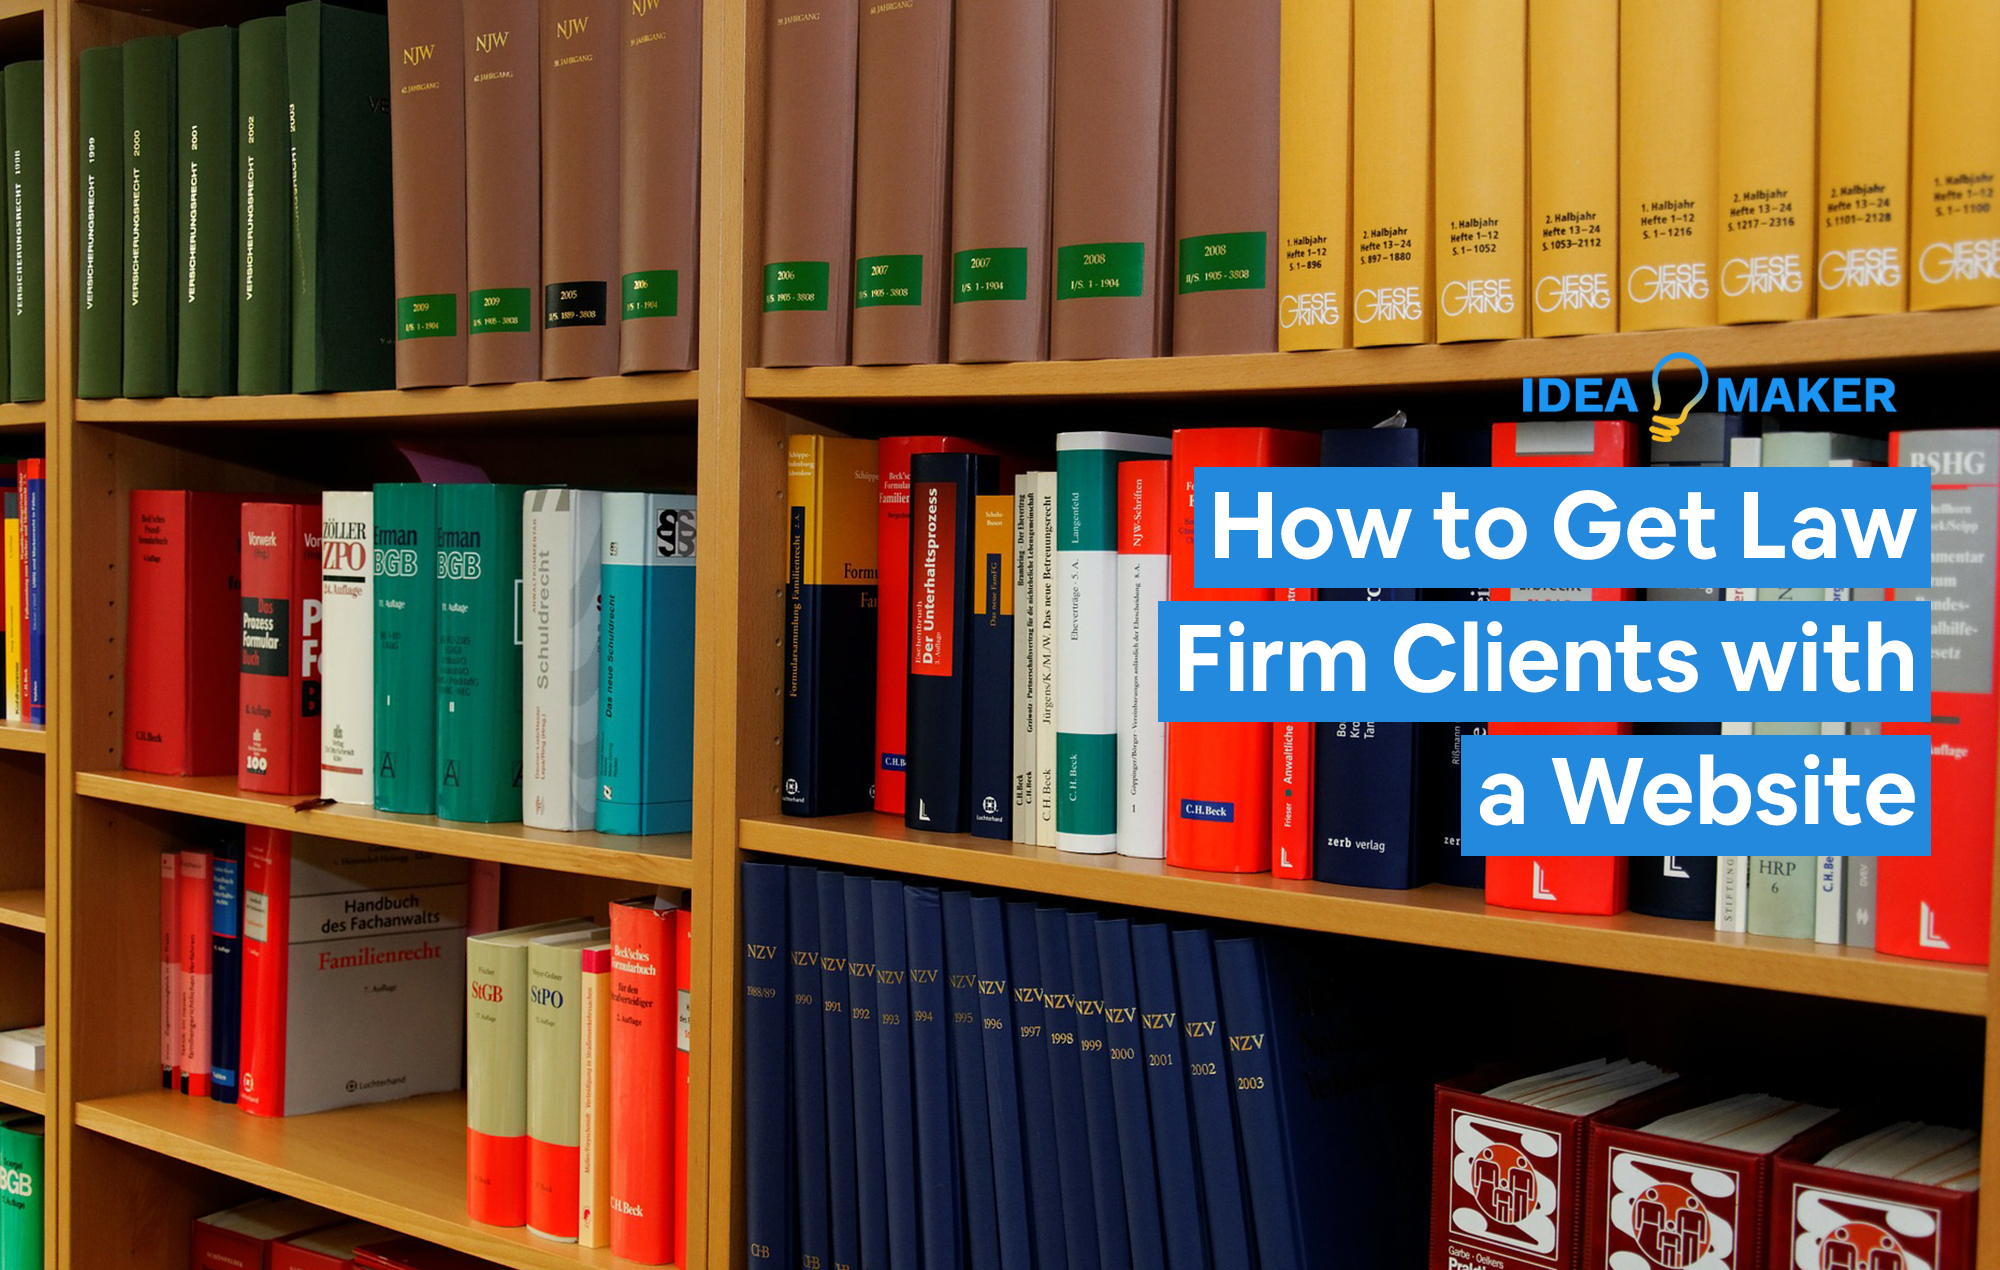 How to Get Law Firm Clients: 10 Reasons to Build a Website